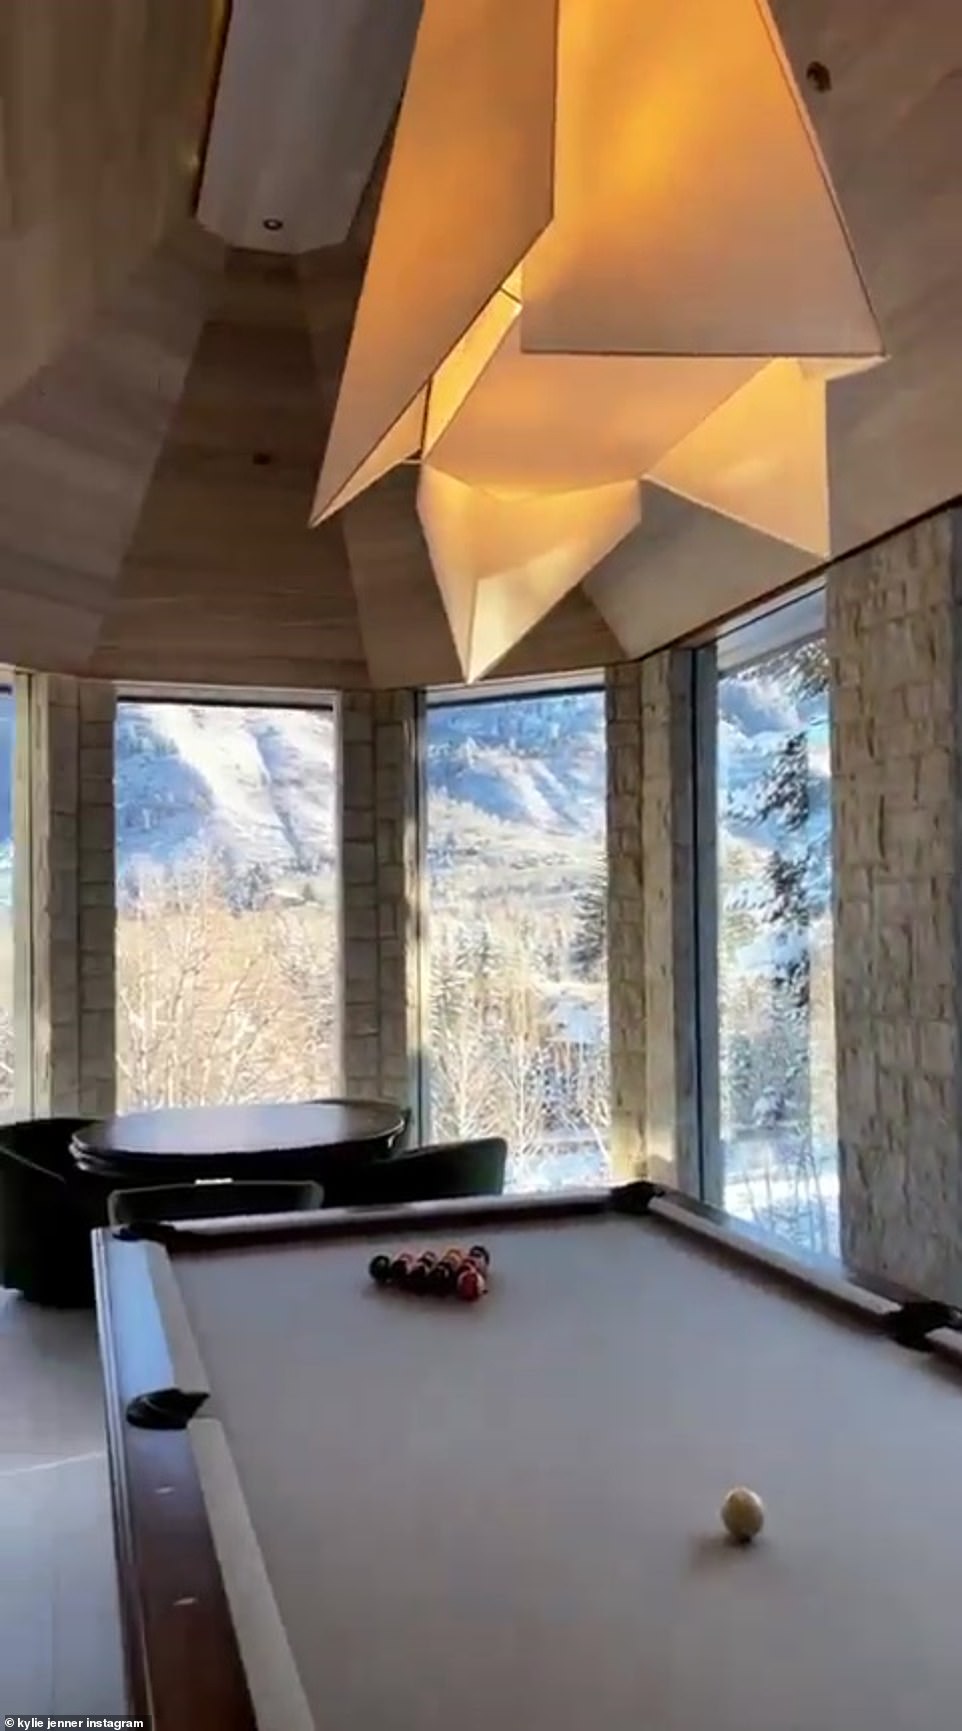 Playing a game: The near-billionaire turned back inside to highlight the home's pool table, which had an impressive view of its own